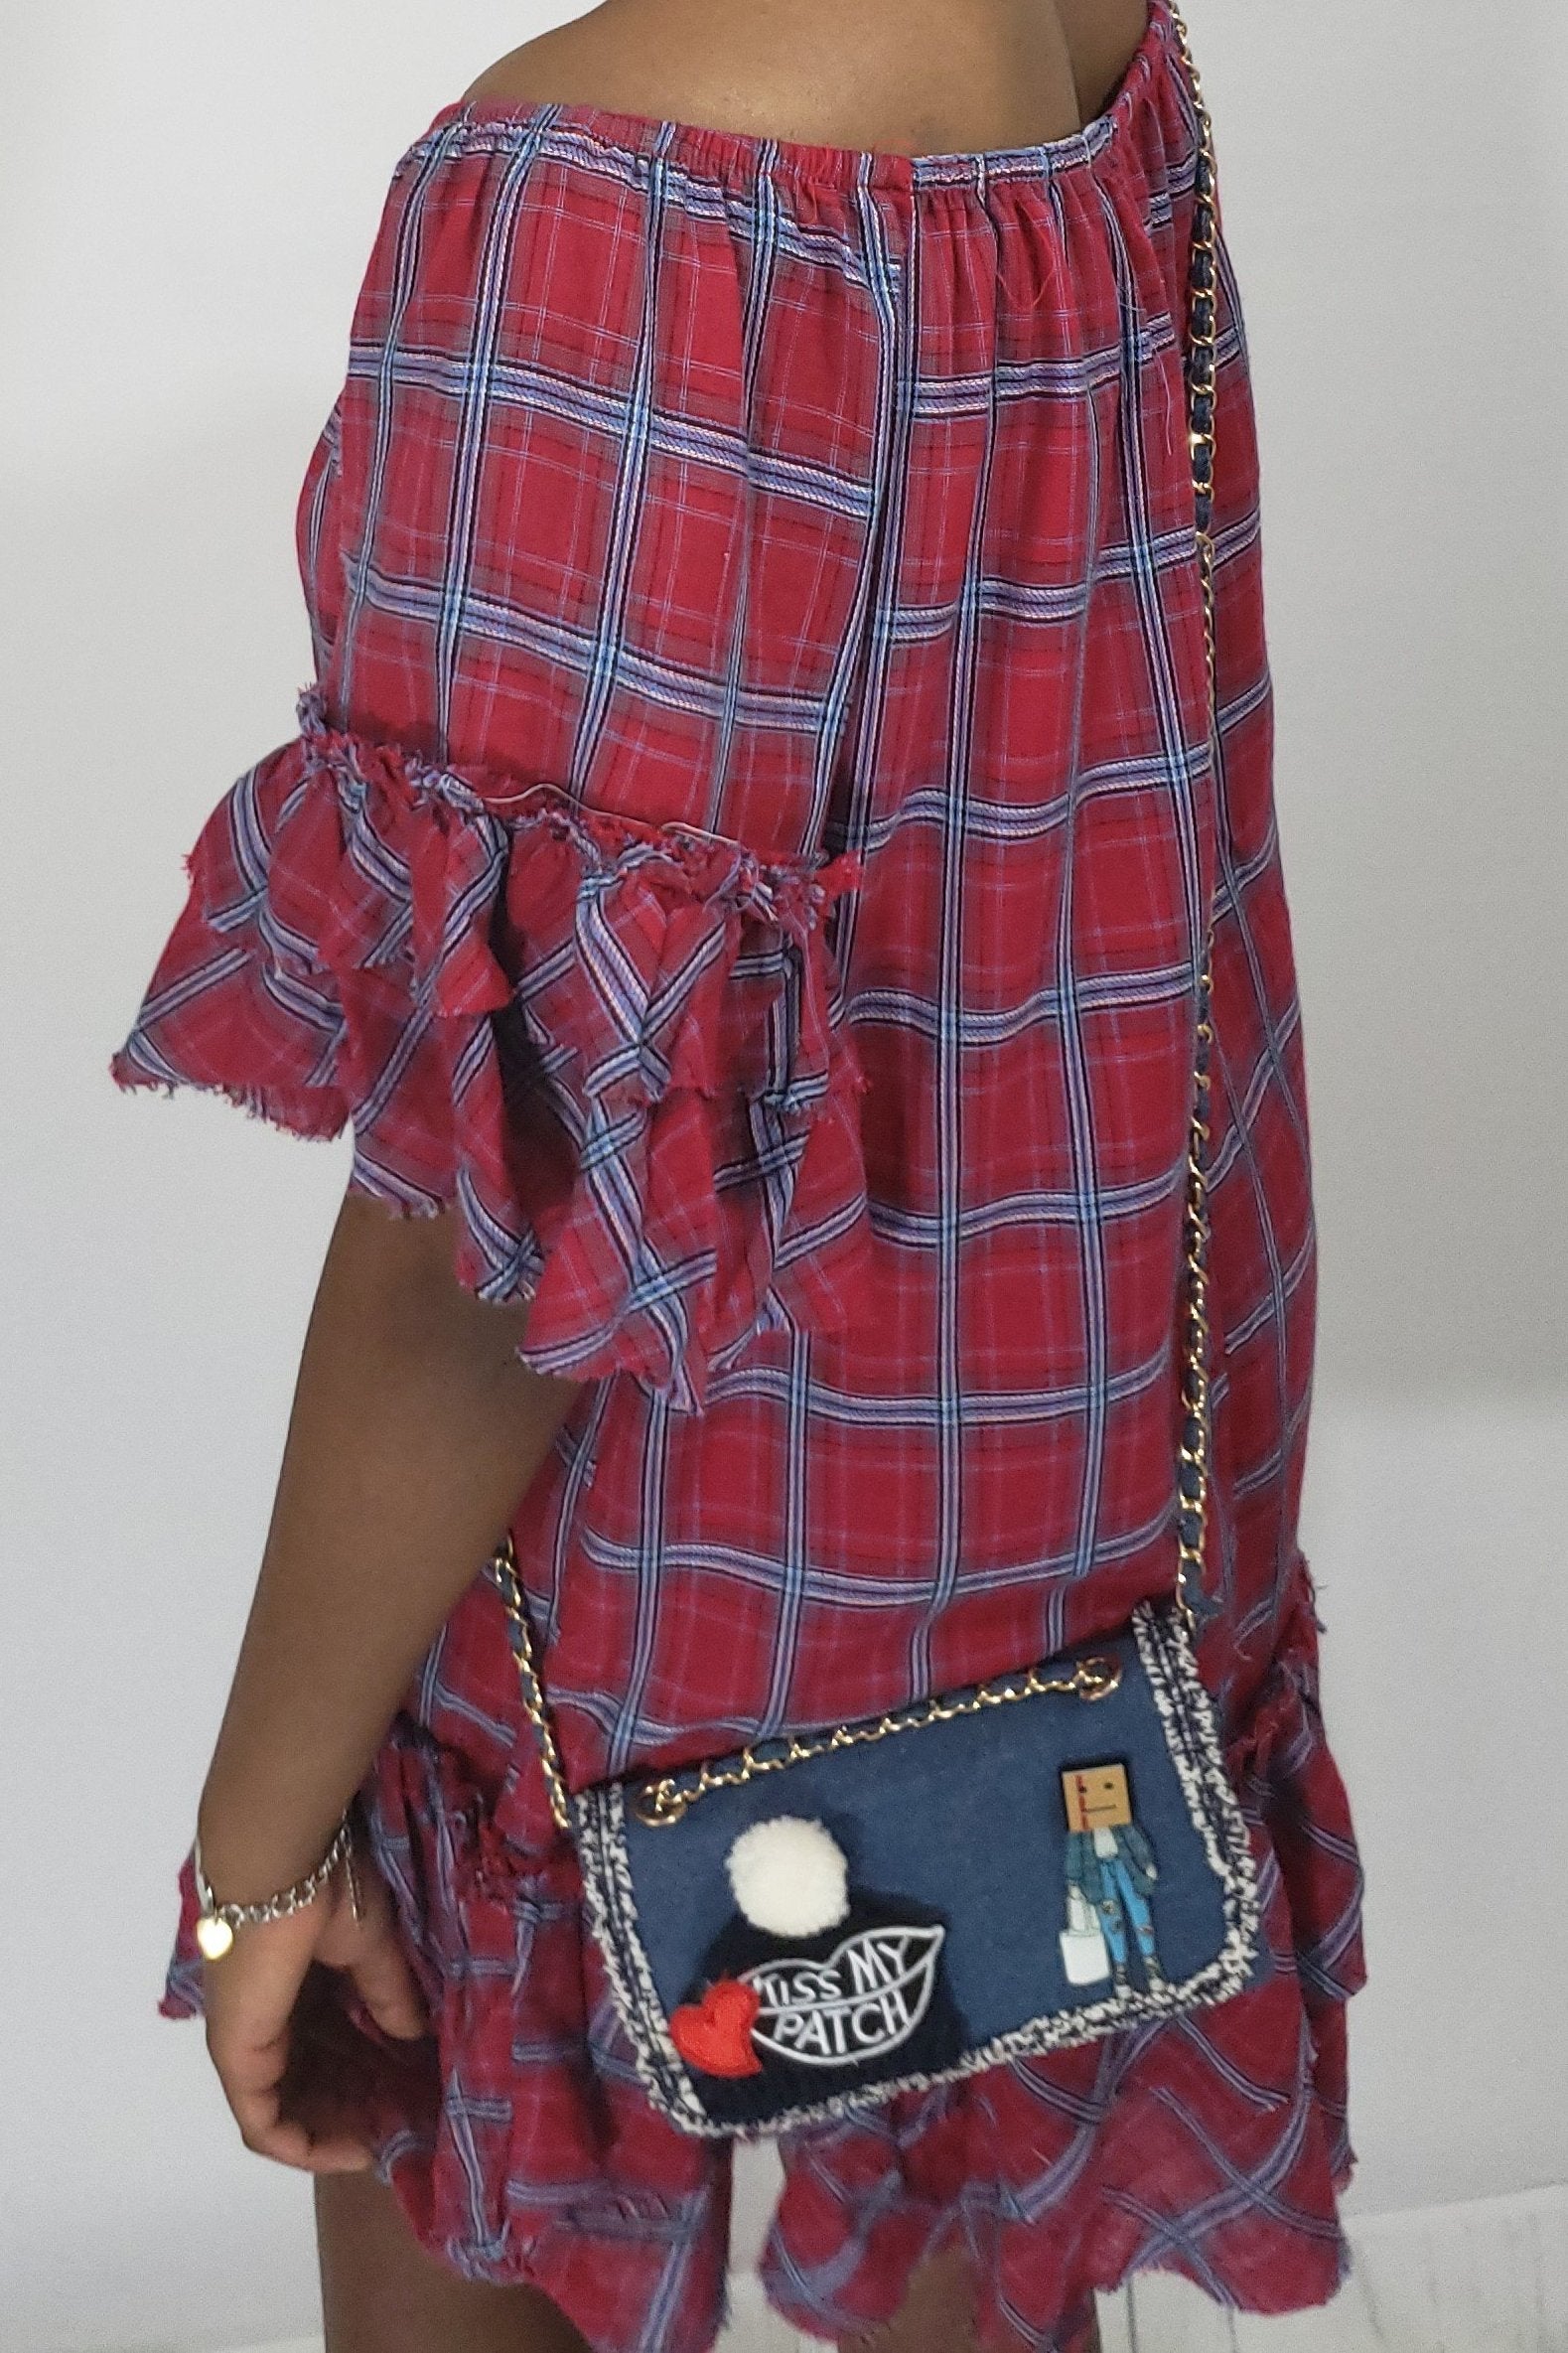 School’s Out Off the Shoulder Plaid Ruffle Dress - Houzz of DVA Boutique